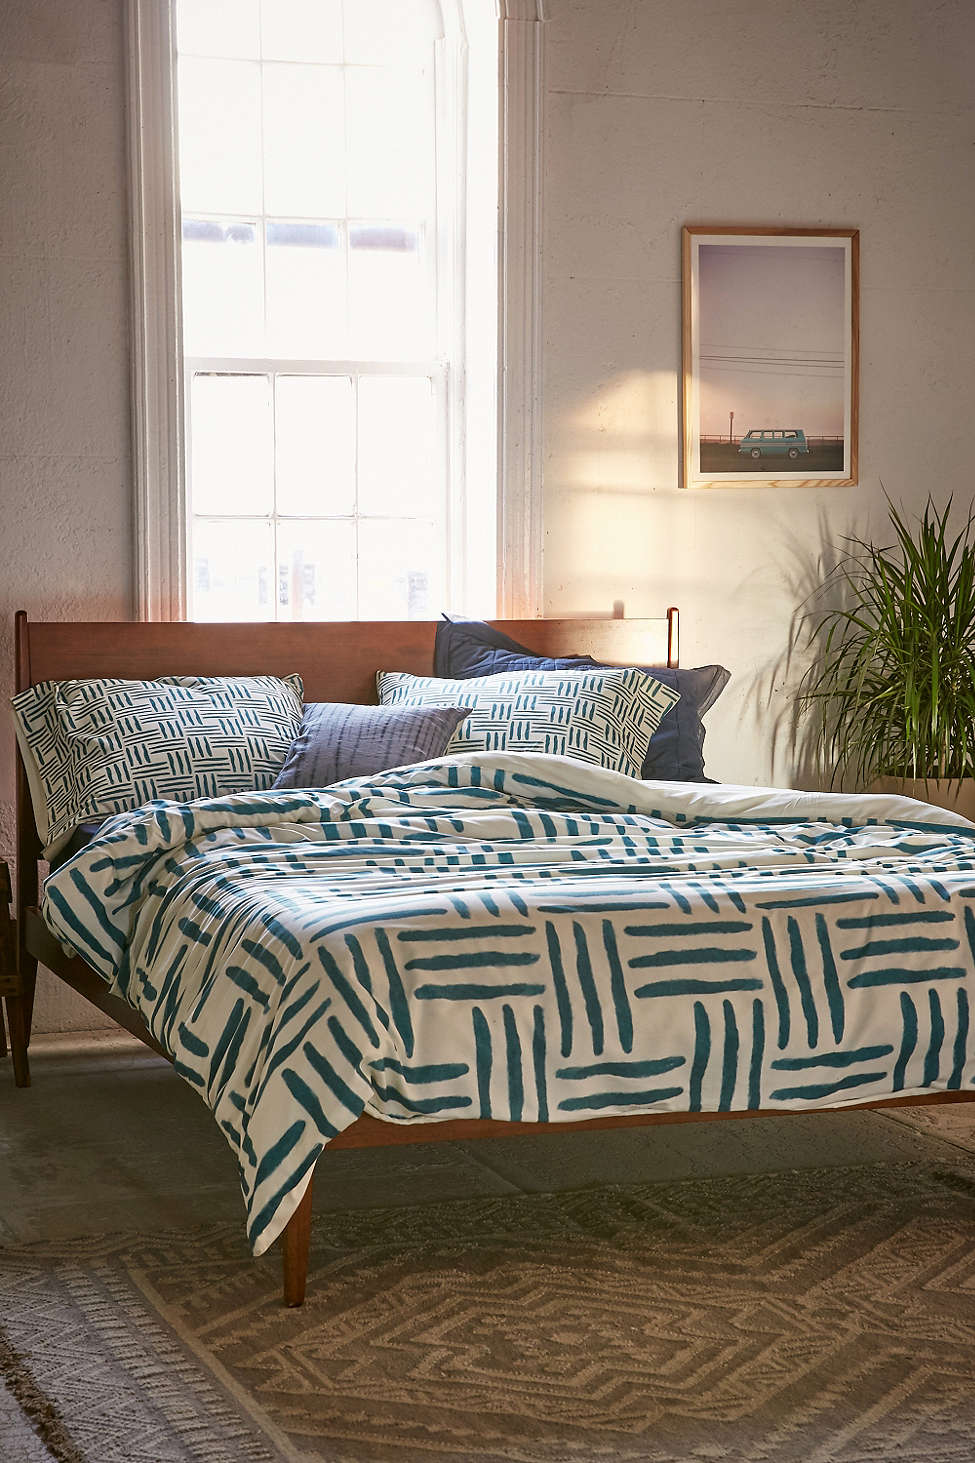 Patterned duvet cover from Urban Outfitters